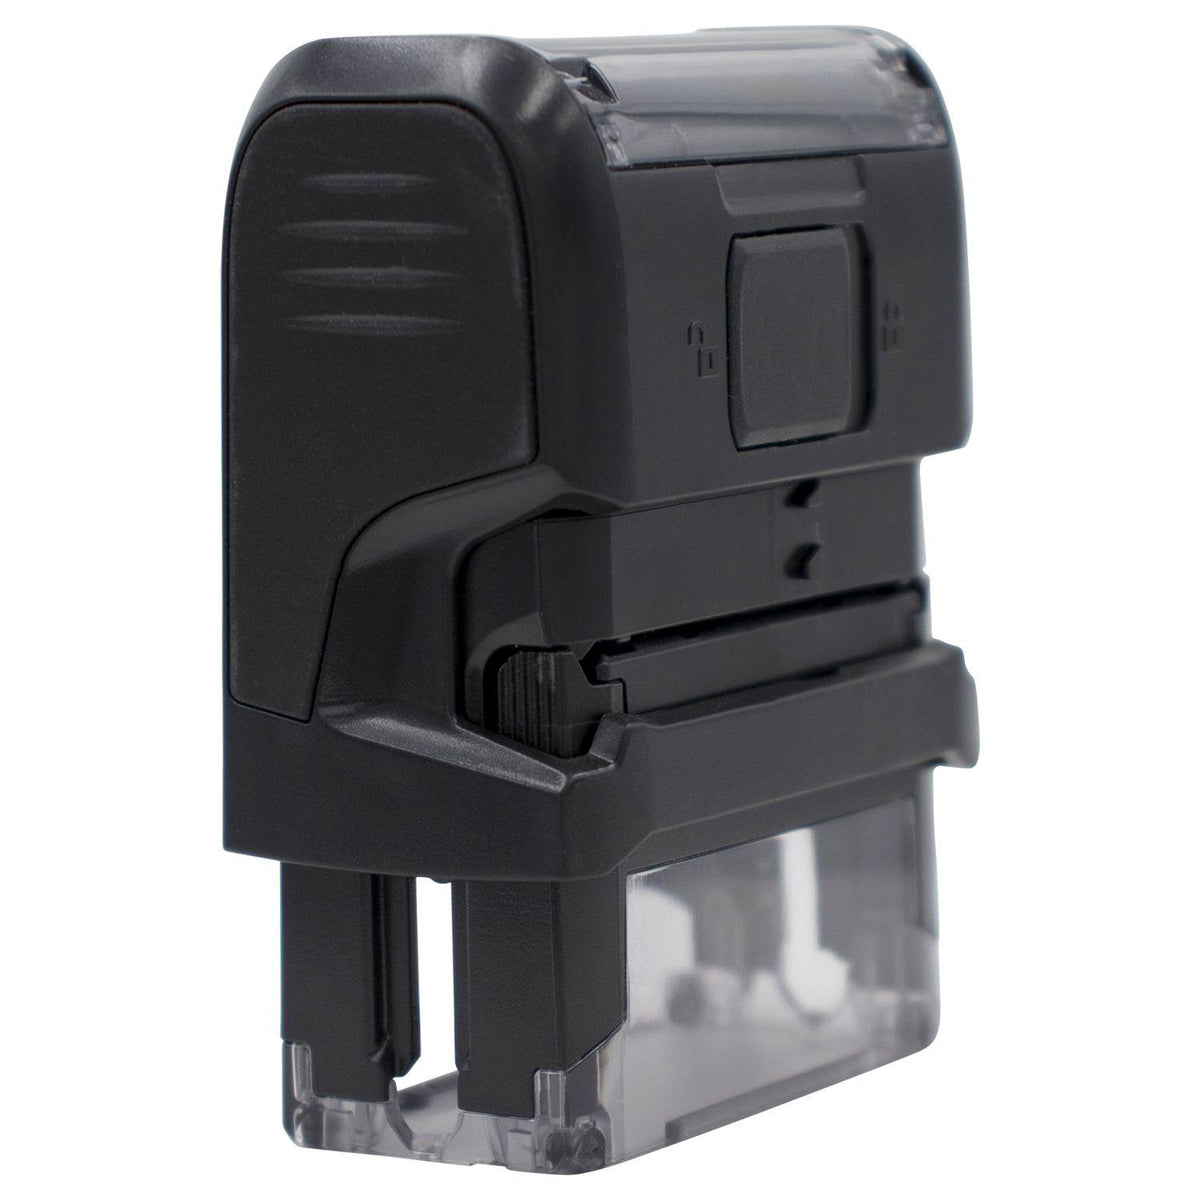 Self Inking Cash Stamp - Engineer Seal Stamps - Brand_Trodat, Impression Size_Small, Stamp Type_Self-Inking Stamp, Type of Use_Business, Type of Use_Finance